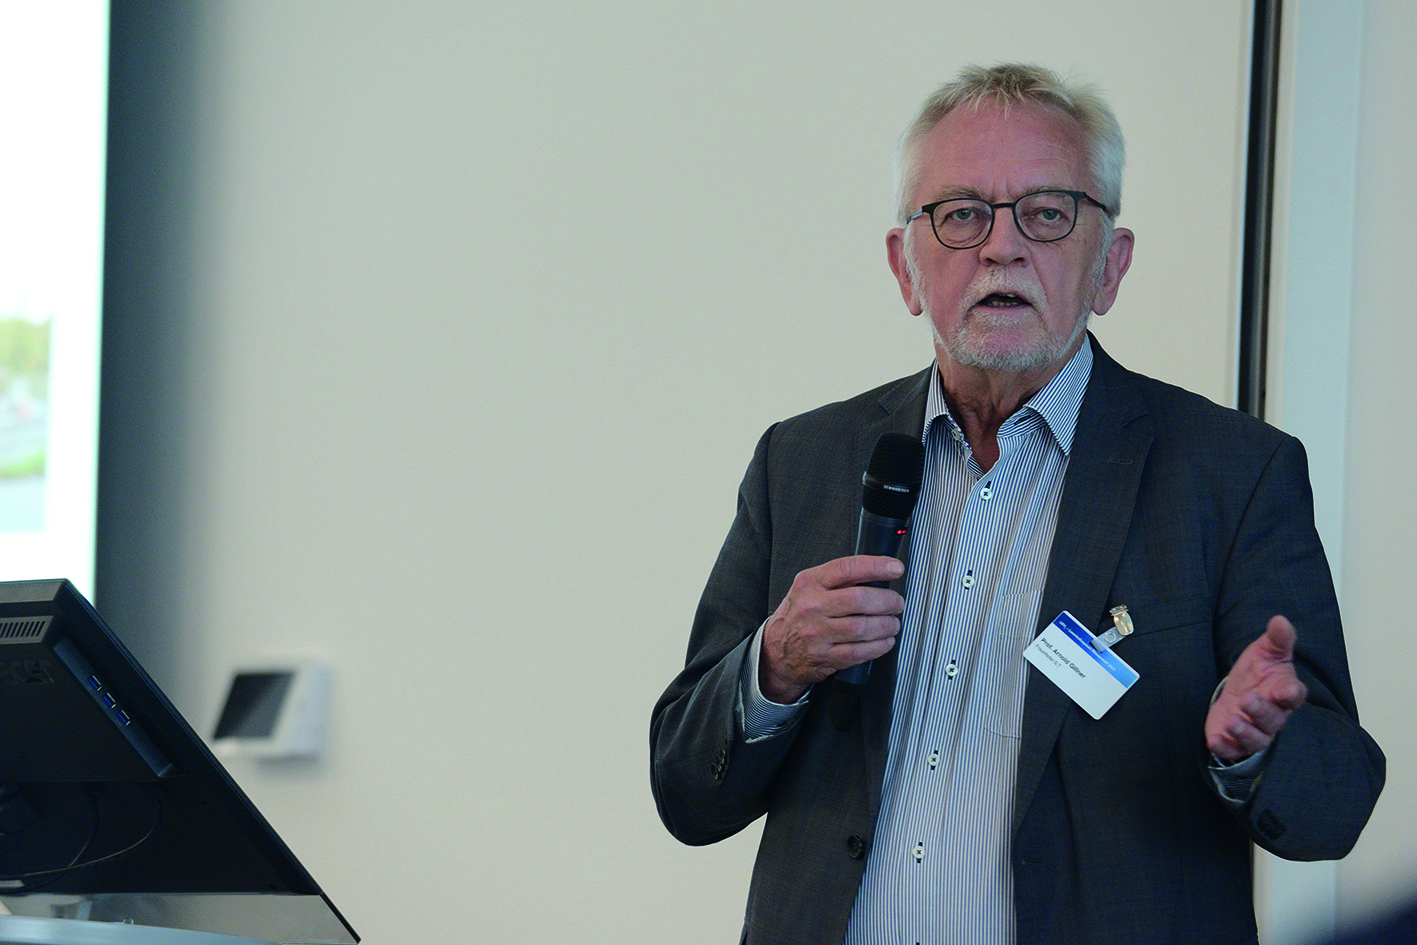 Prof. Arnold Gillner, Head of “Research Markets” at Fraunhofer ILT: “We can tackle many topics together at our test facilities at the Digital Photonic Production DPP research campus in Aachen to get a hydrogen platform up and running.”